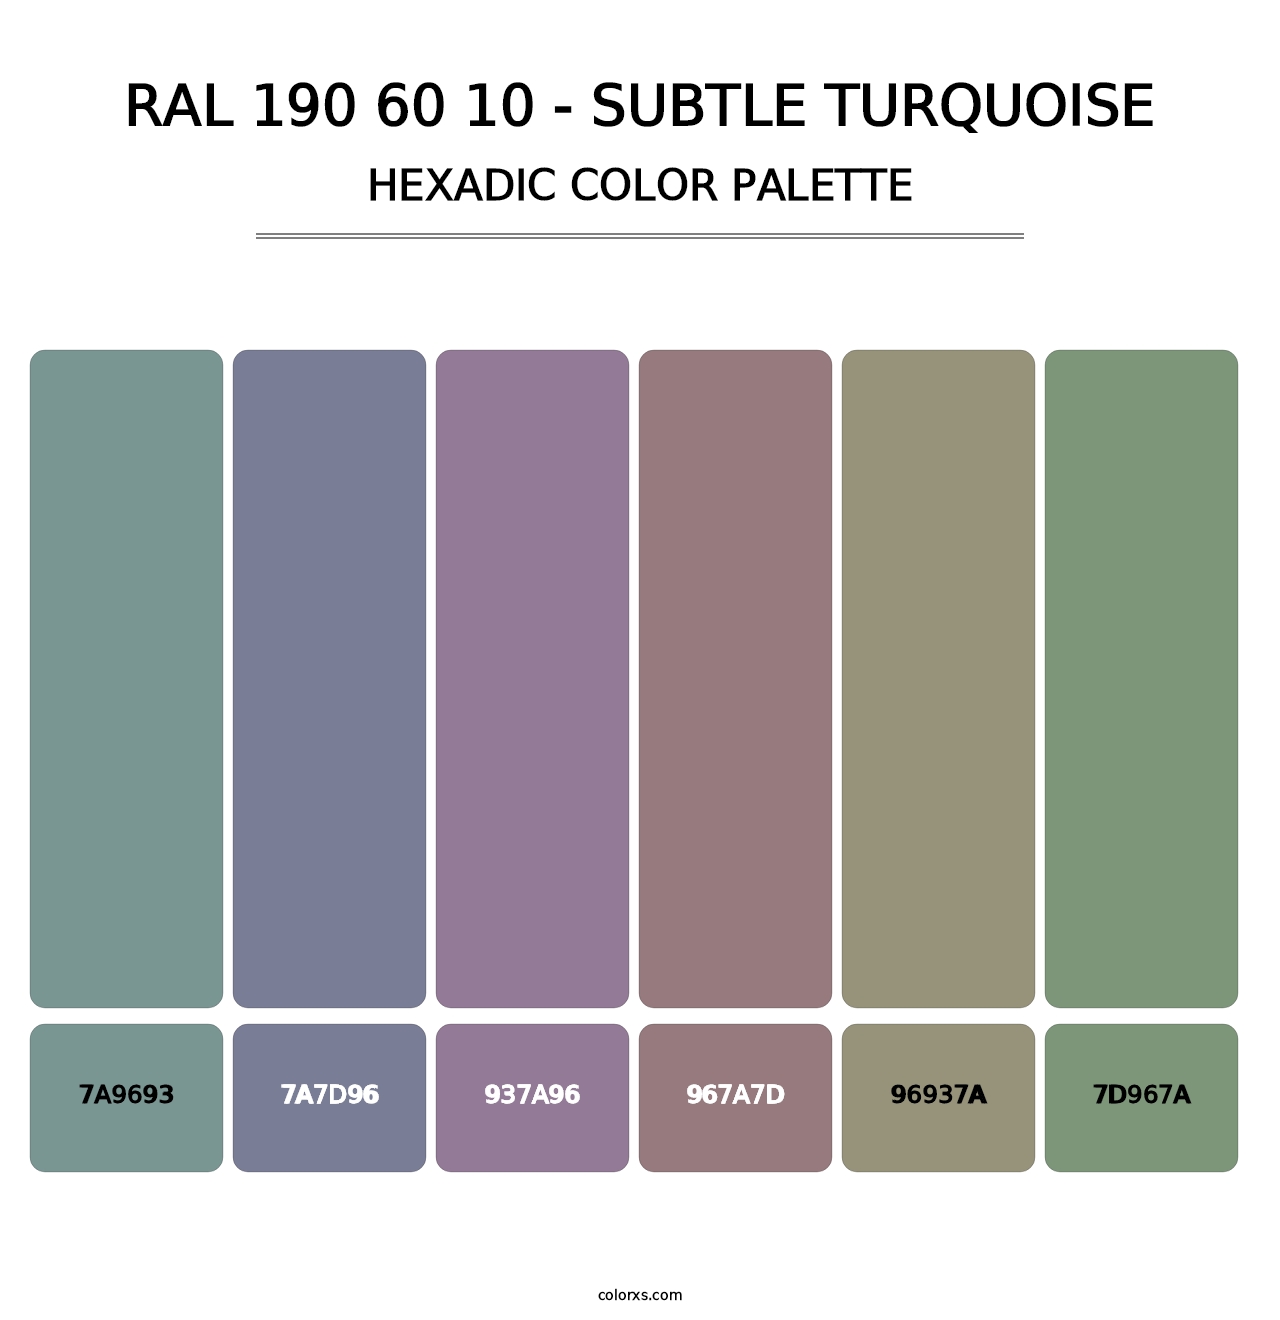 RAL 190 60 10 - Subtle Turquoise - Hexadic Color Palette